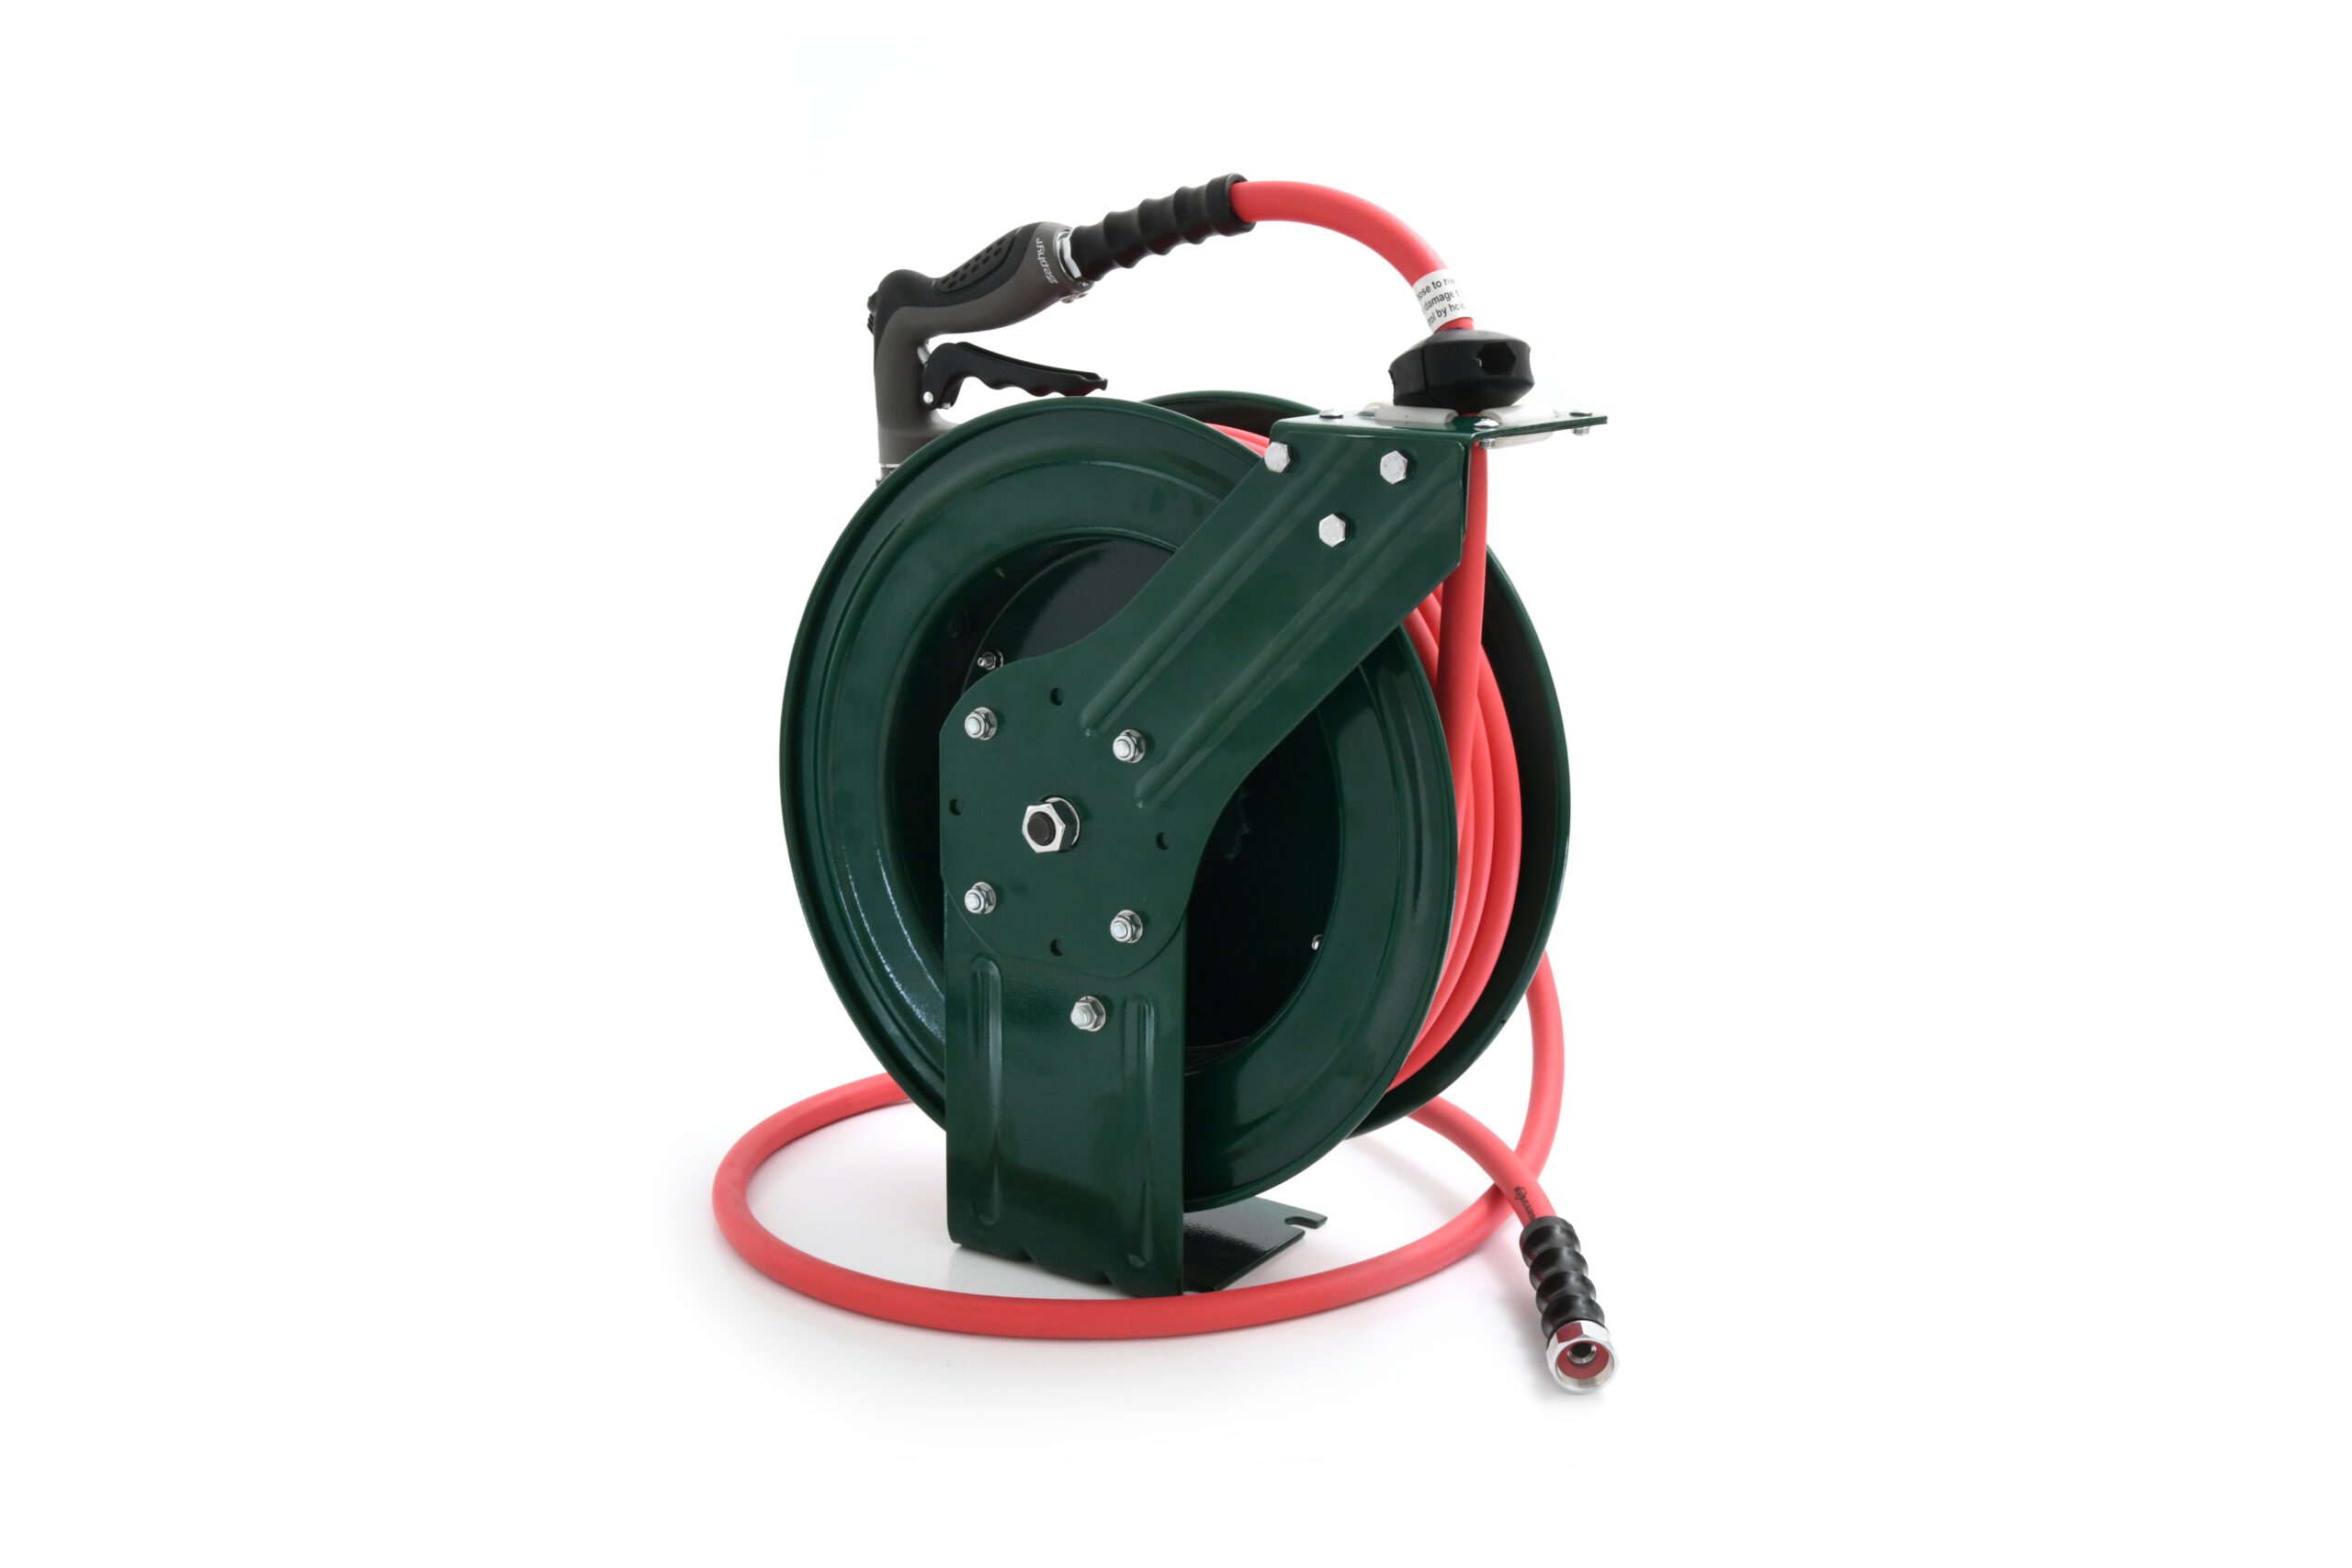 Zephyr Retractable Water Hose Reel with Spray Gun (Heavy-Duty | Multiple Colors), 1/2(13mm) / Green with Red Hose / 50ft / 15m